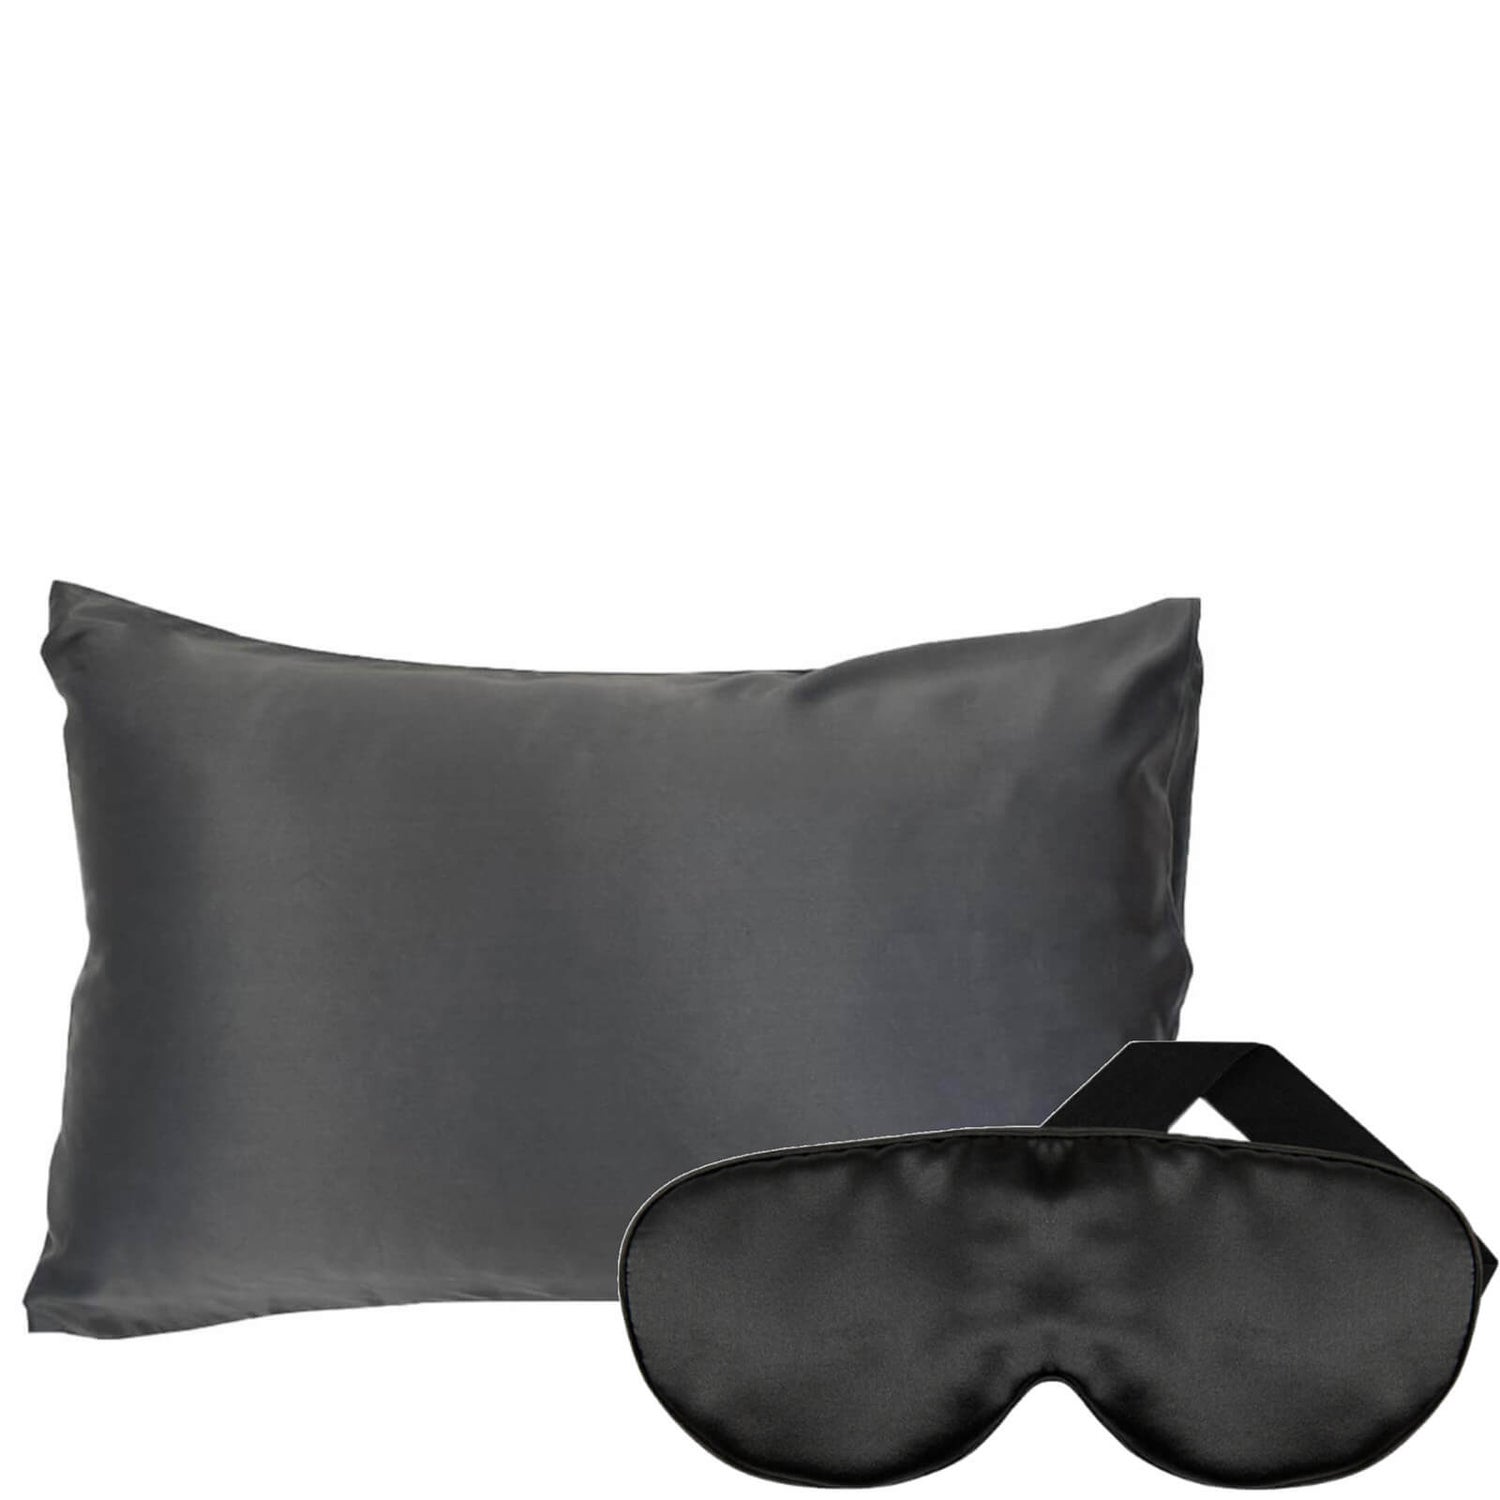 The Goodnight Co. Silk Sleep Mask and Queen Size Pillowcase - Charcoal (Worth $140.00)